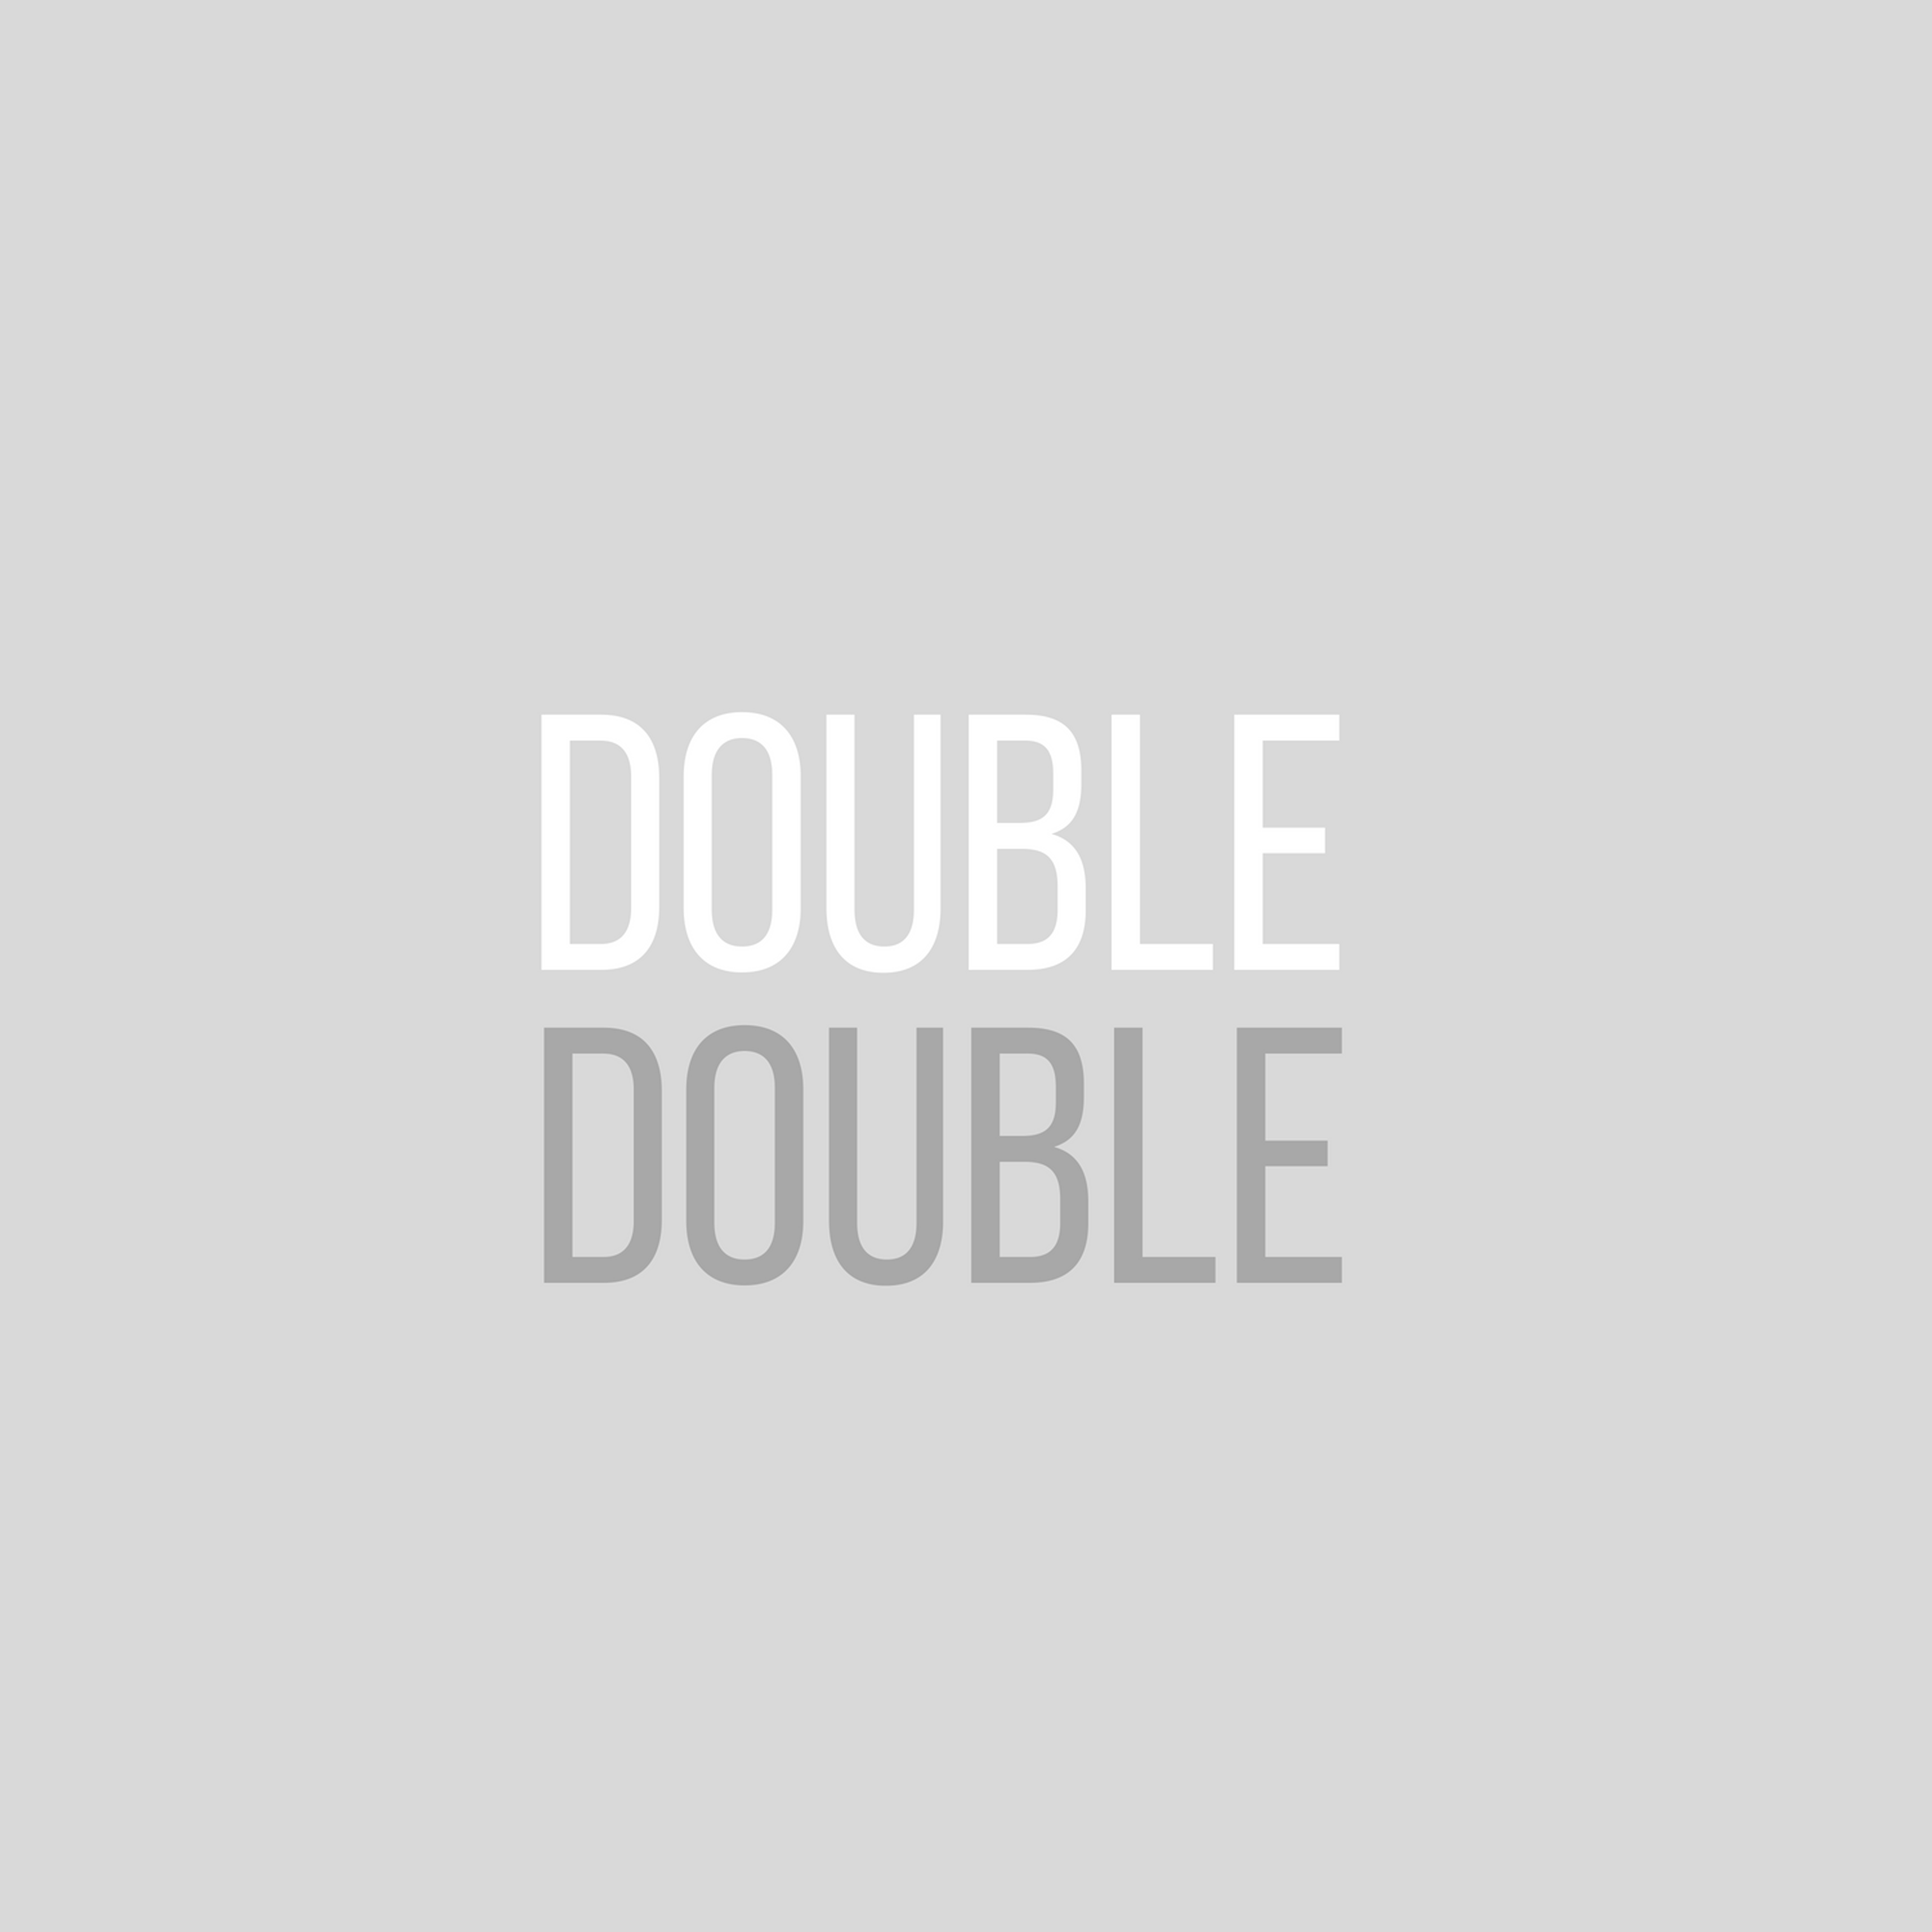 art every day number 341 words double double what does it mean